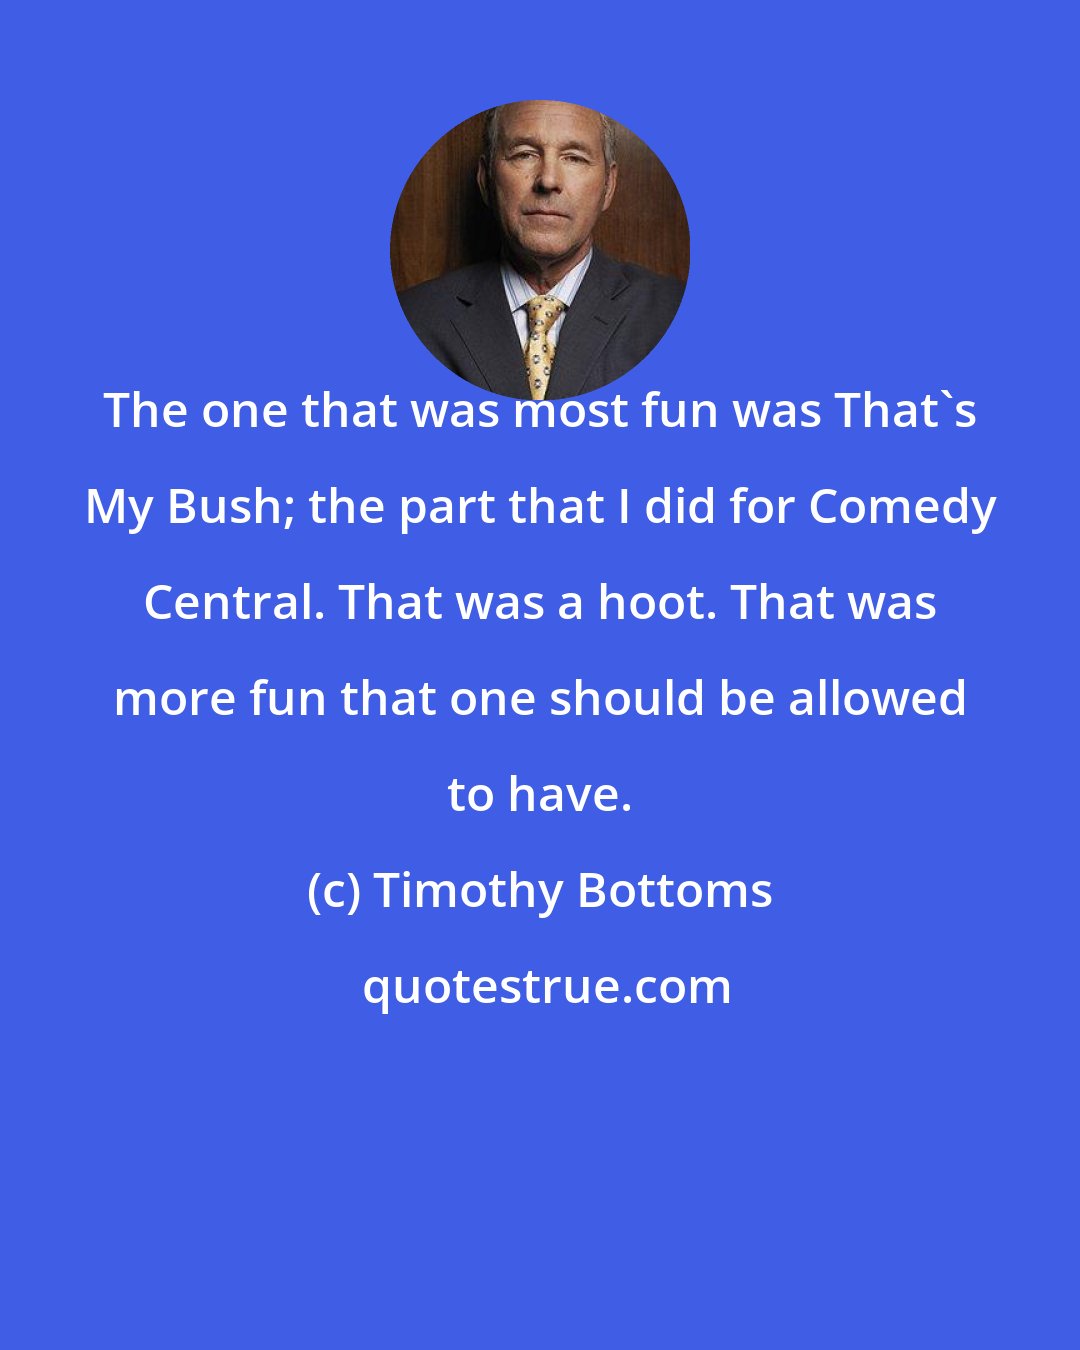 Timothy Bottoms: The one that was most fun was That's My Bush; the part that I did for Comedy Central. That was a hoot. That was more fun that one should be allowed to have.